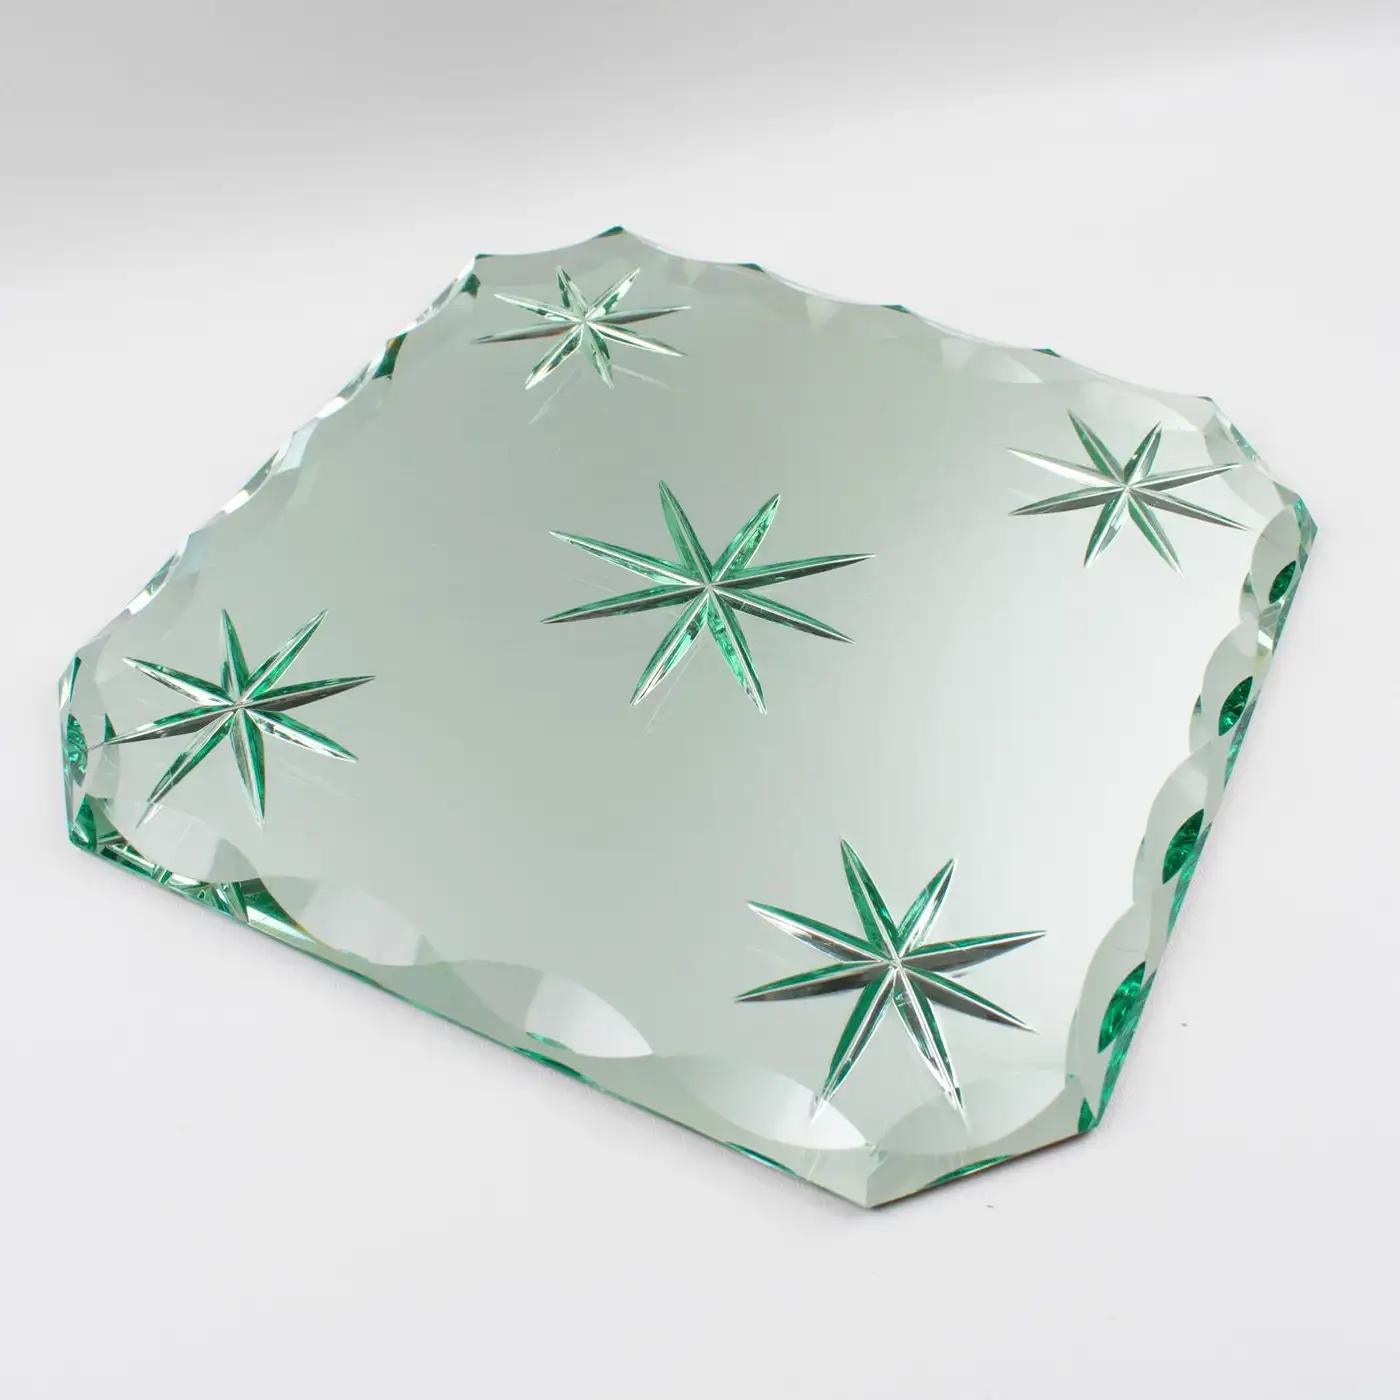 Jean Luce Art Deco Mirrored Glass Tray, Platter or Centerpiece, 1930s In Good Condition For Sale In Atlanta, GA